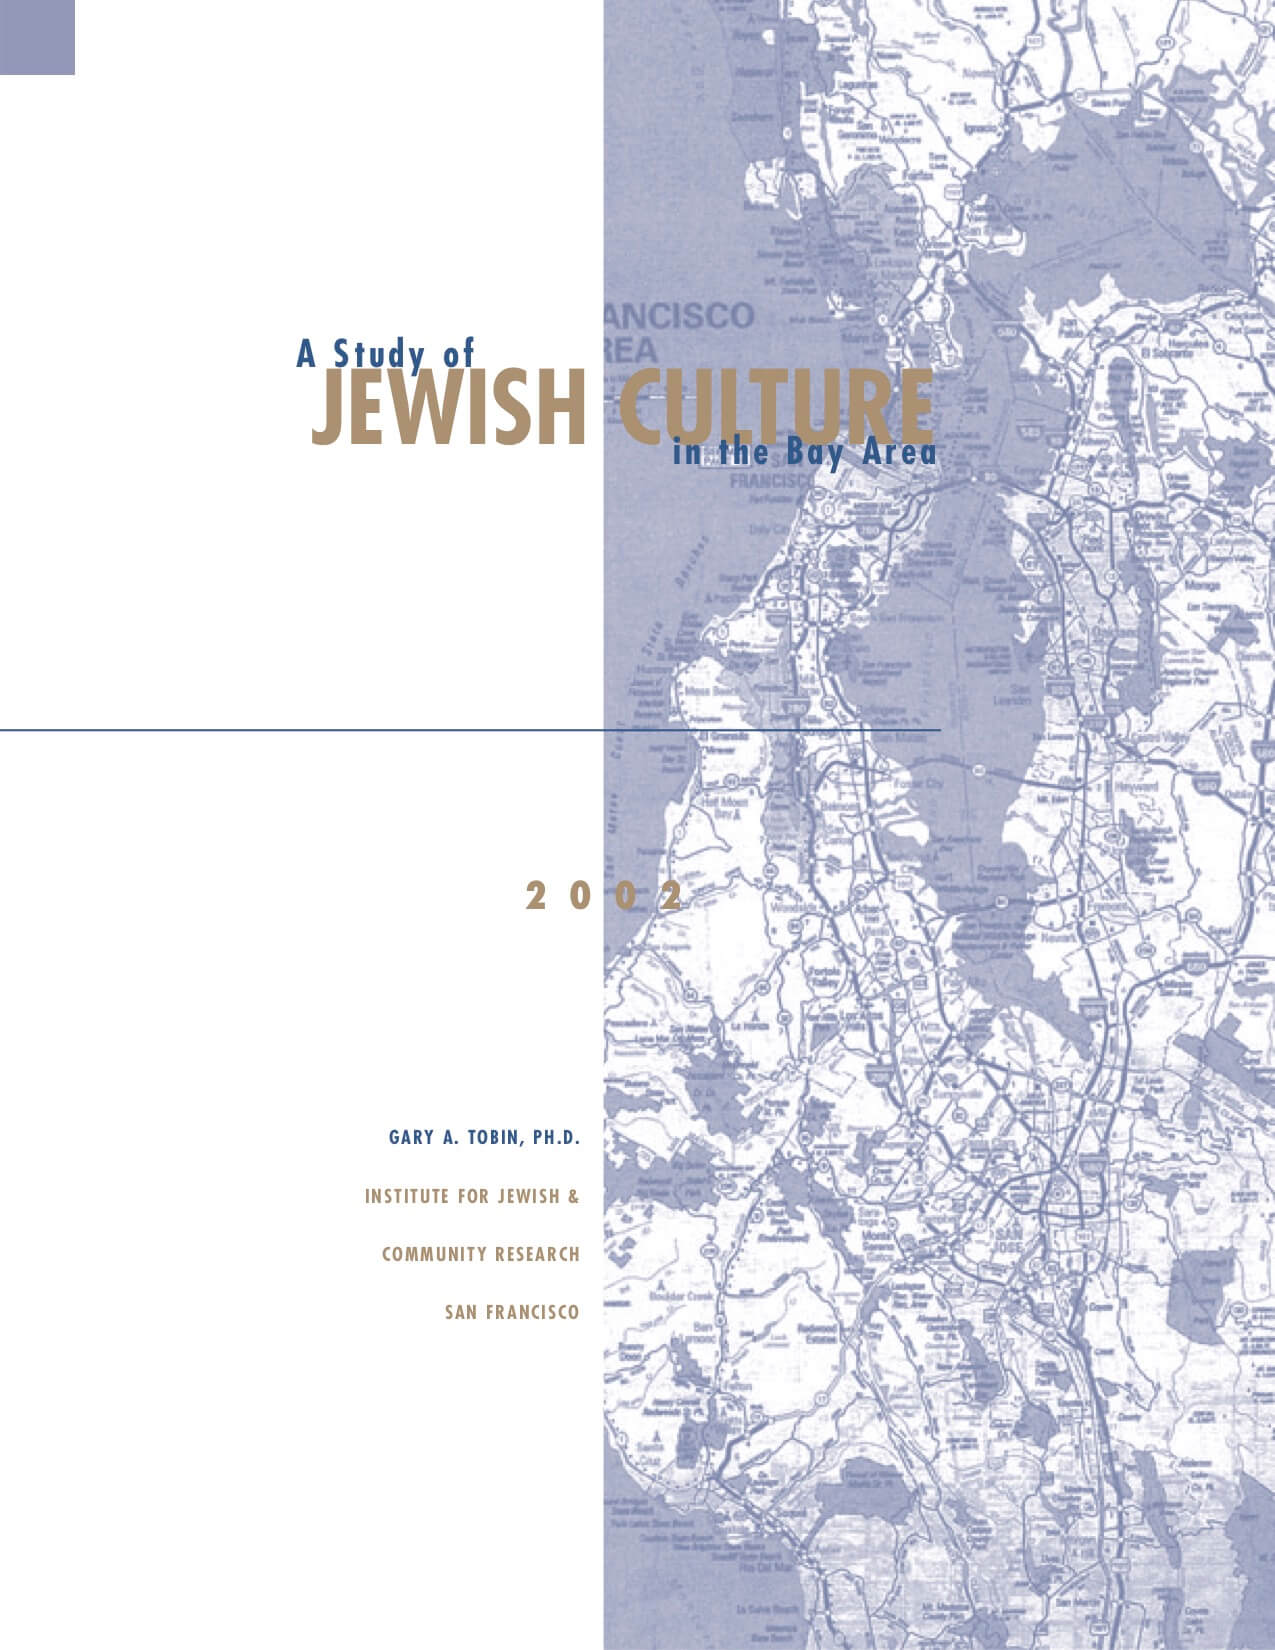 A Study of Jewish Culture in the Bay Area